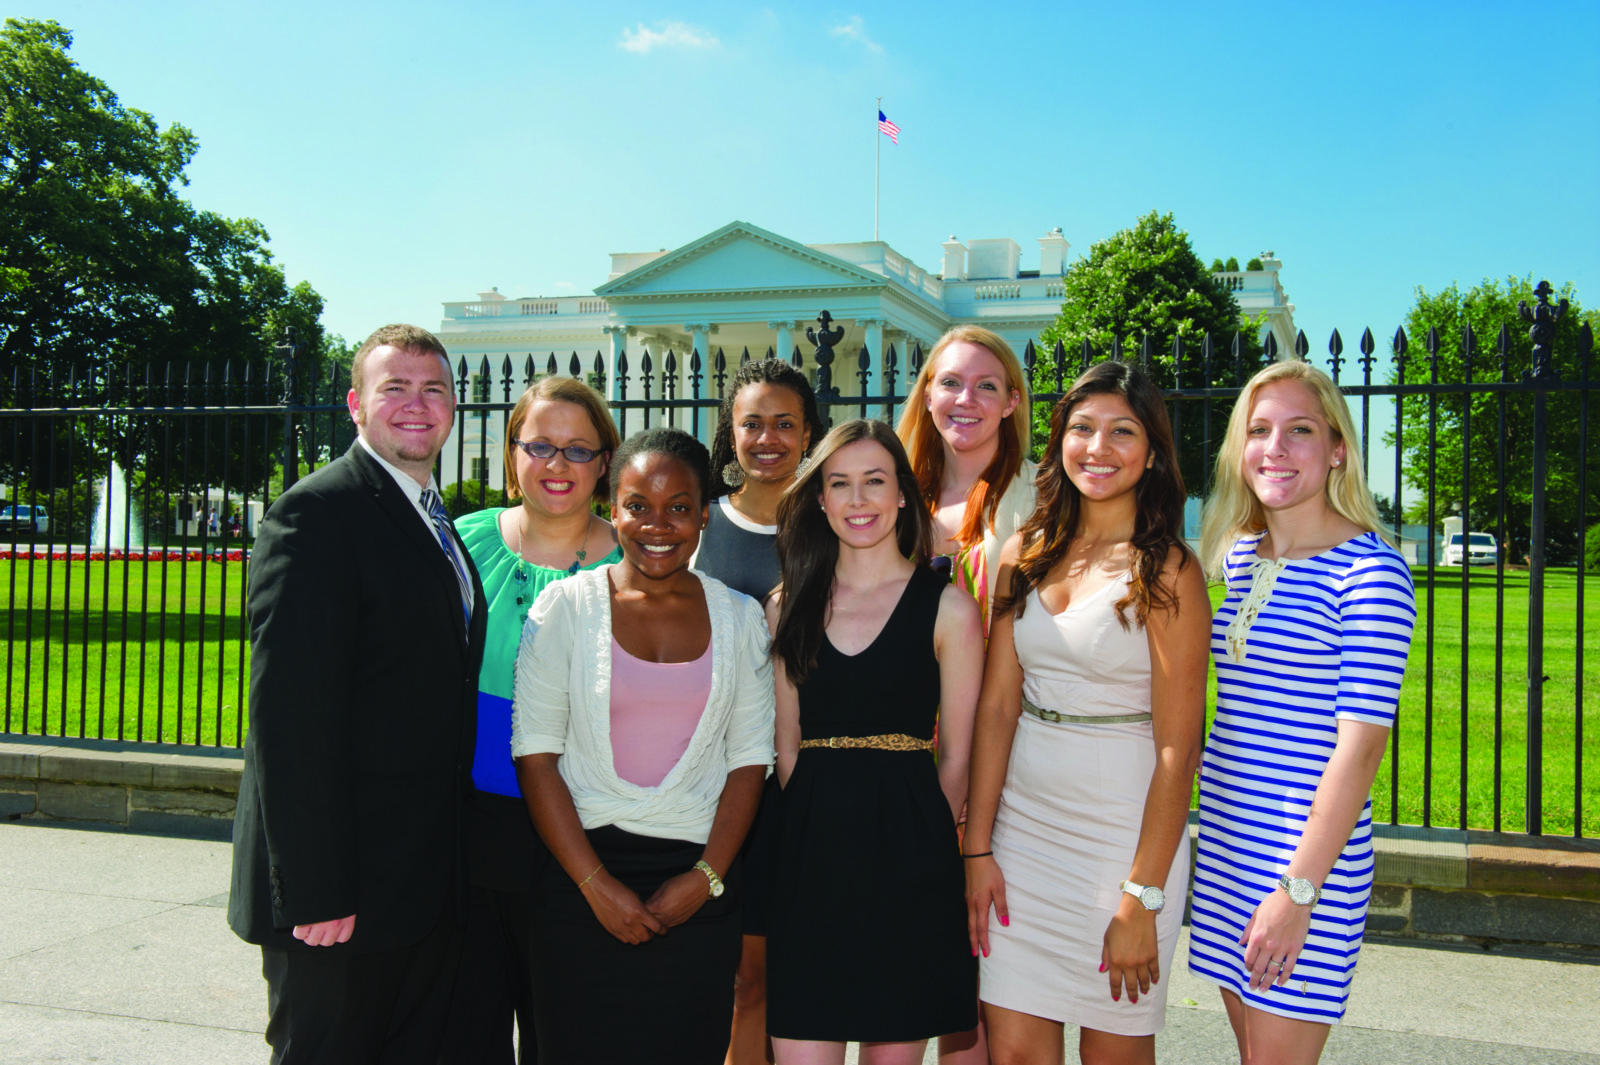 As part of the LTAP program, students will attend site briefings at the White House, U.S. Capitol, Pentagon and other institutions significant to the office of the presidency.